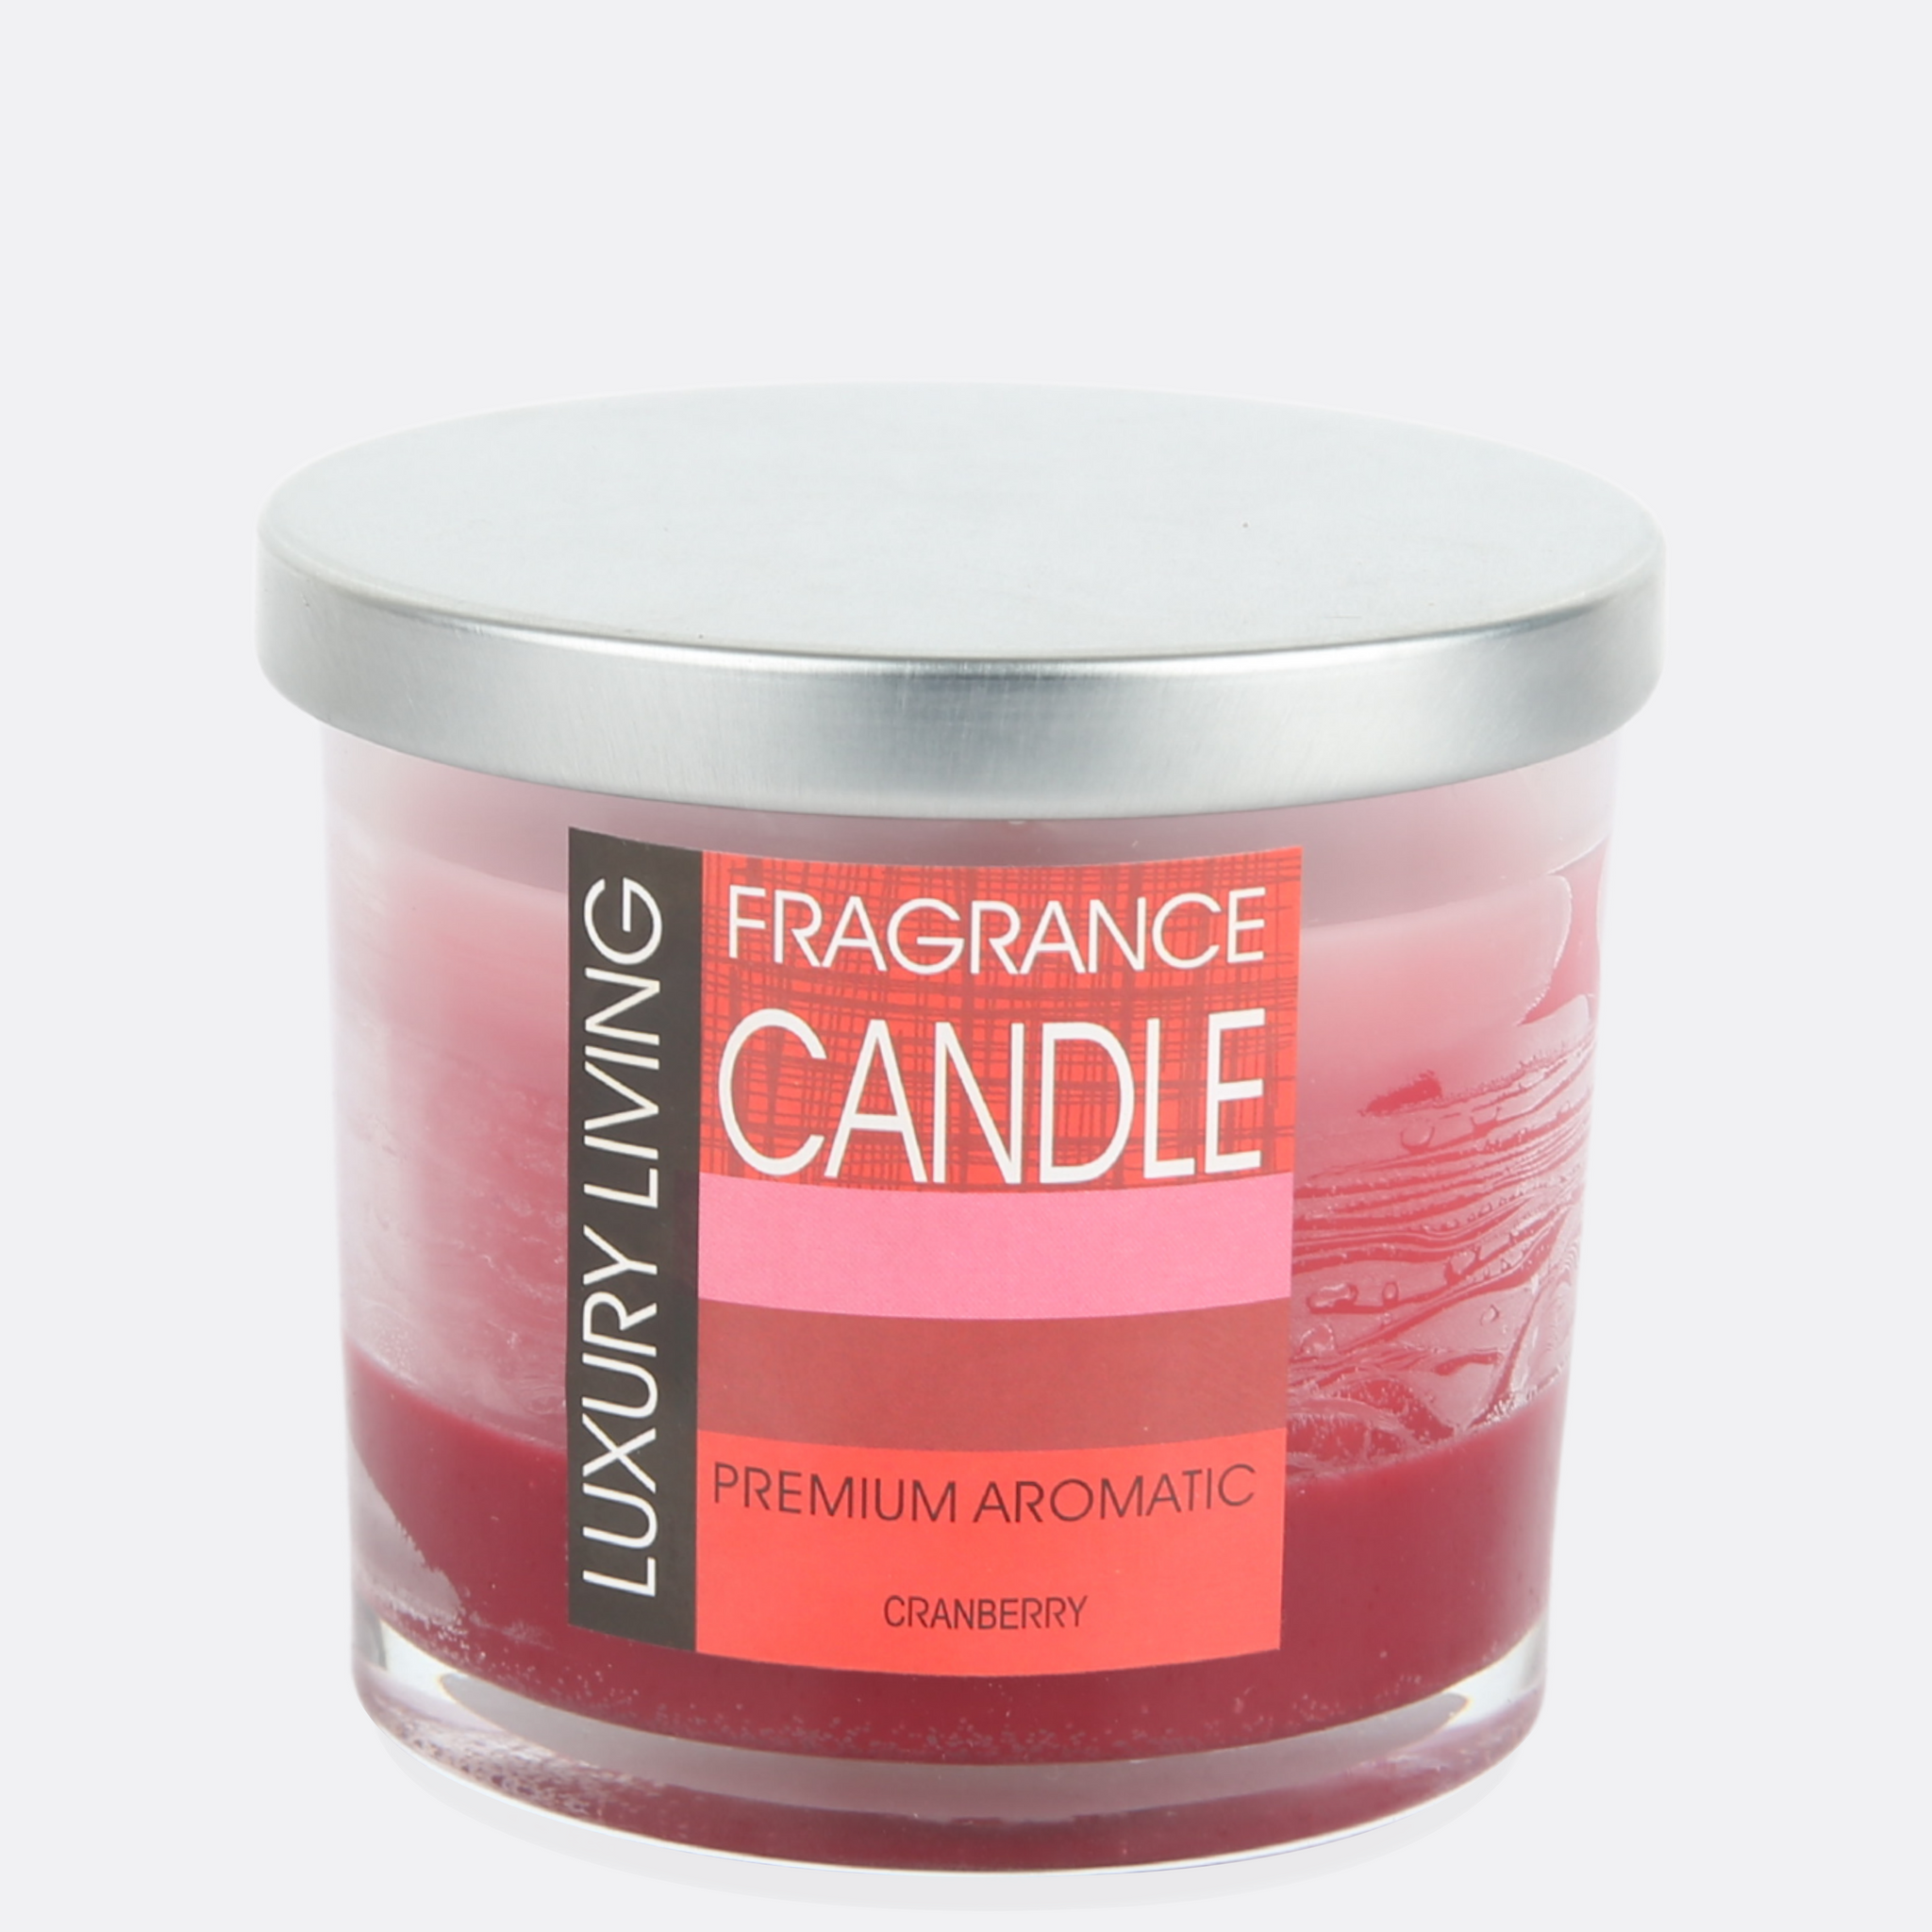 Cranberry Fragrant Candle